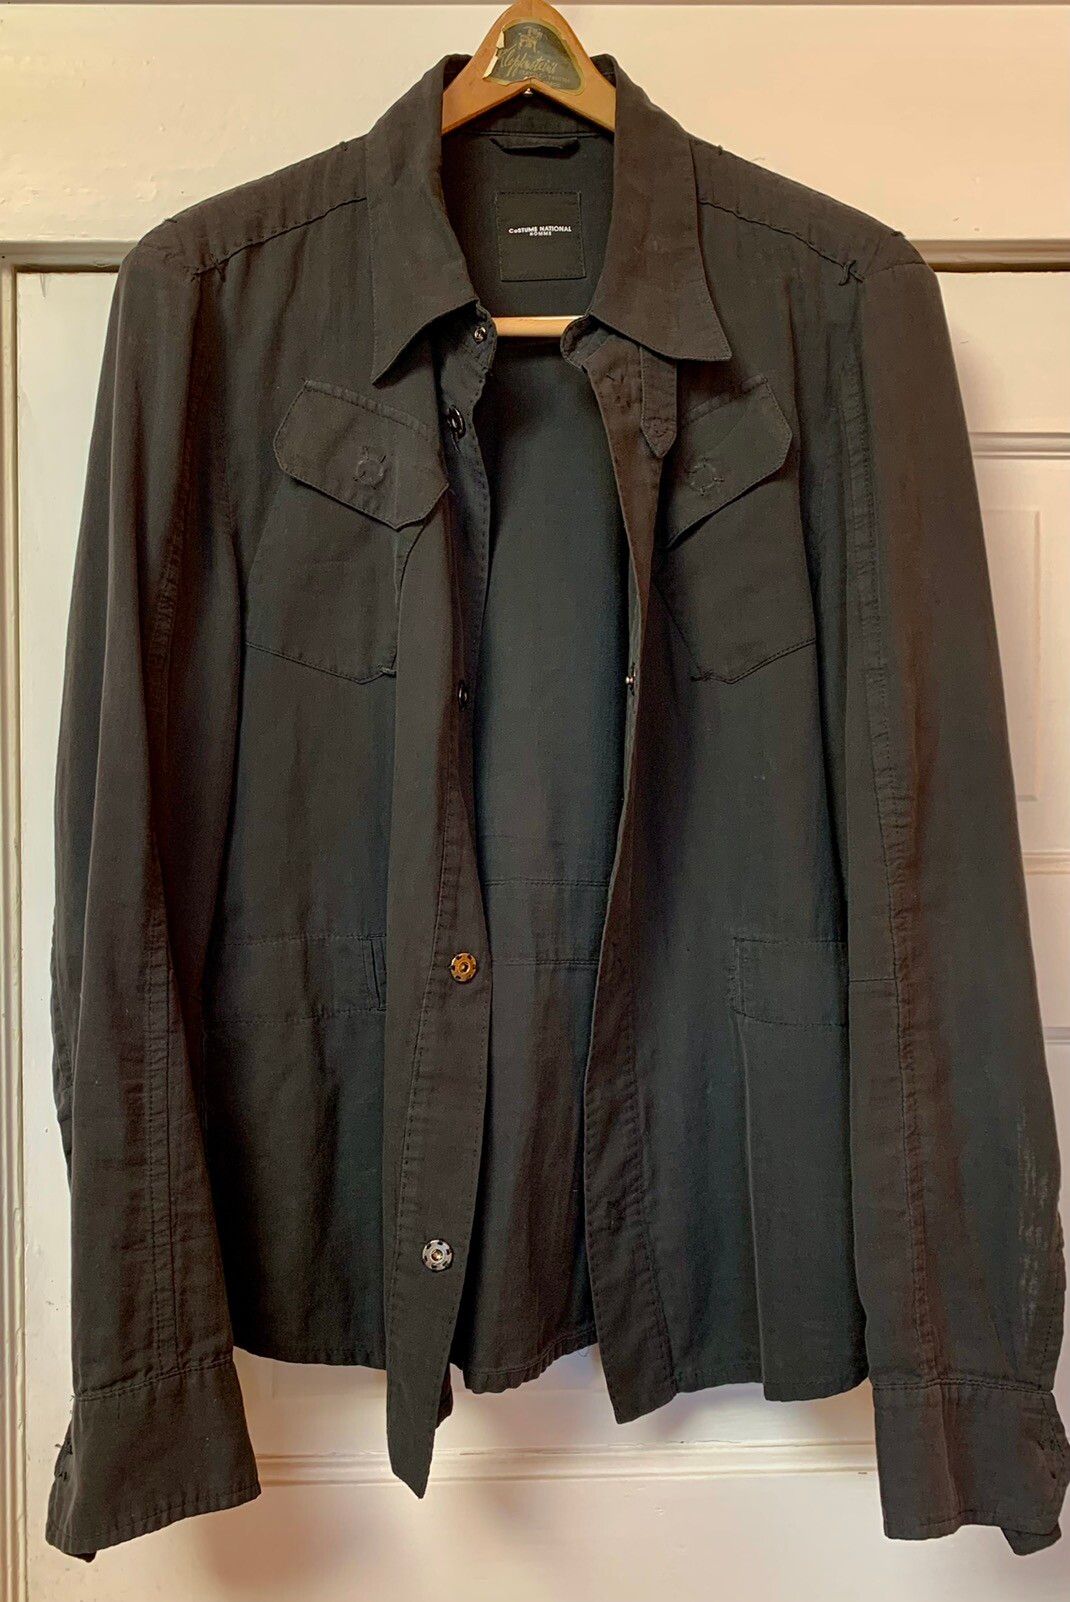 Costume National Vintage Costume National Black Cotton Military Over Shirt 48 Size US M / EU 48-50 / 2 - 1 Preview